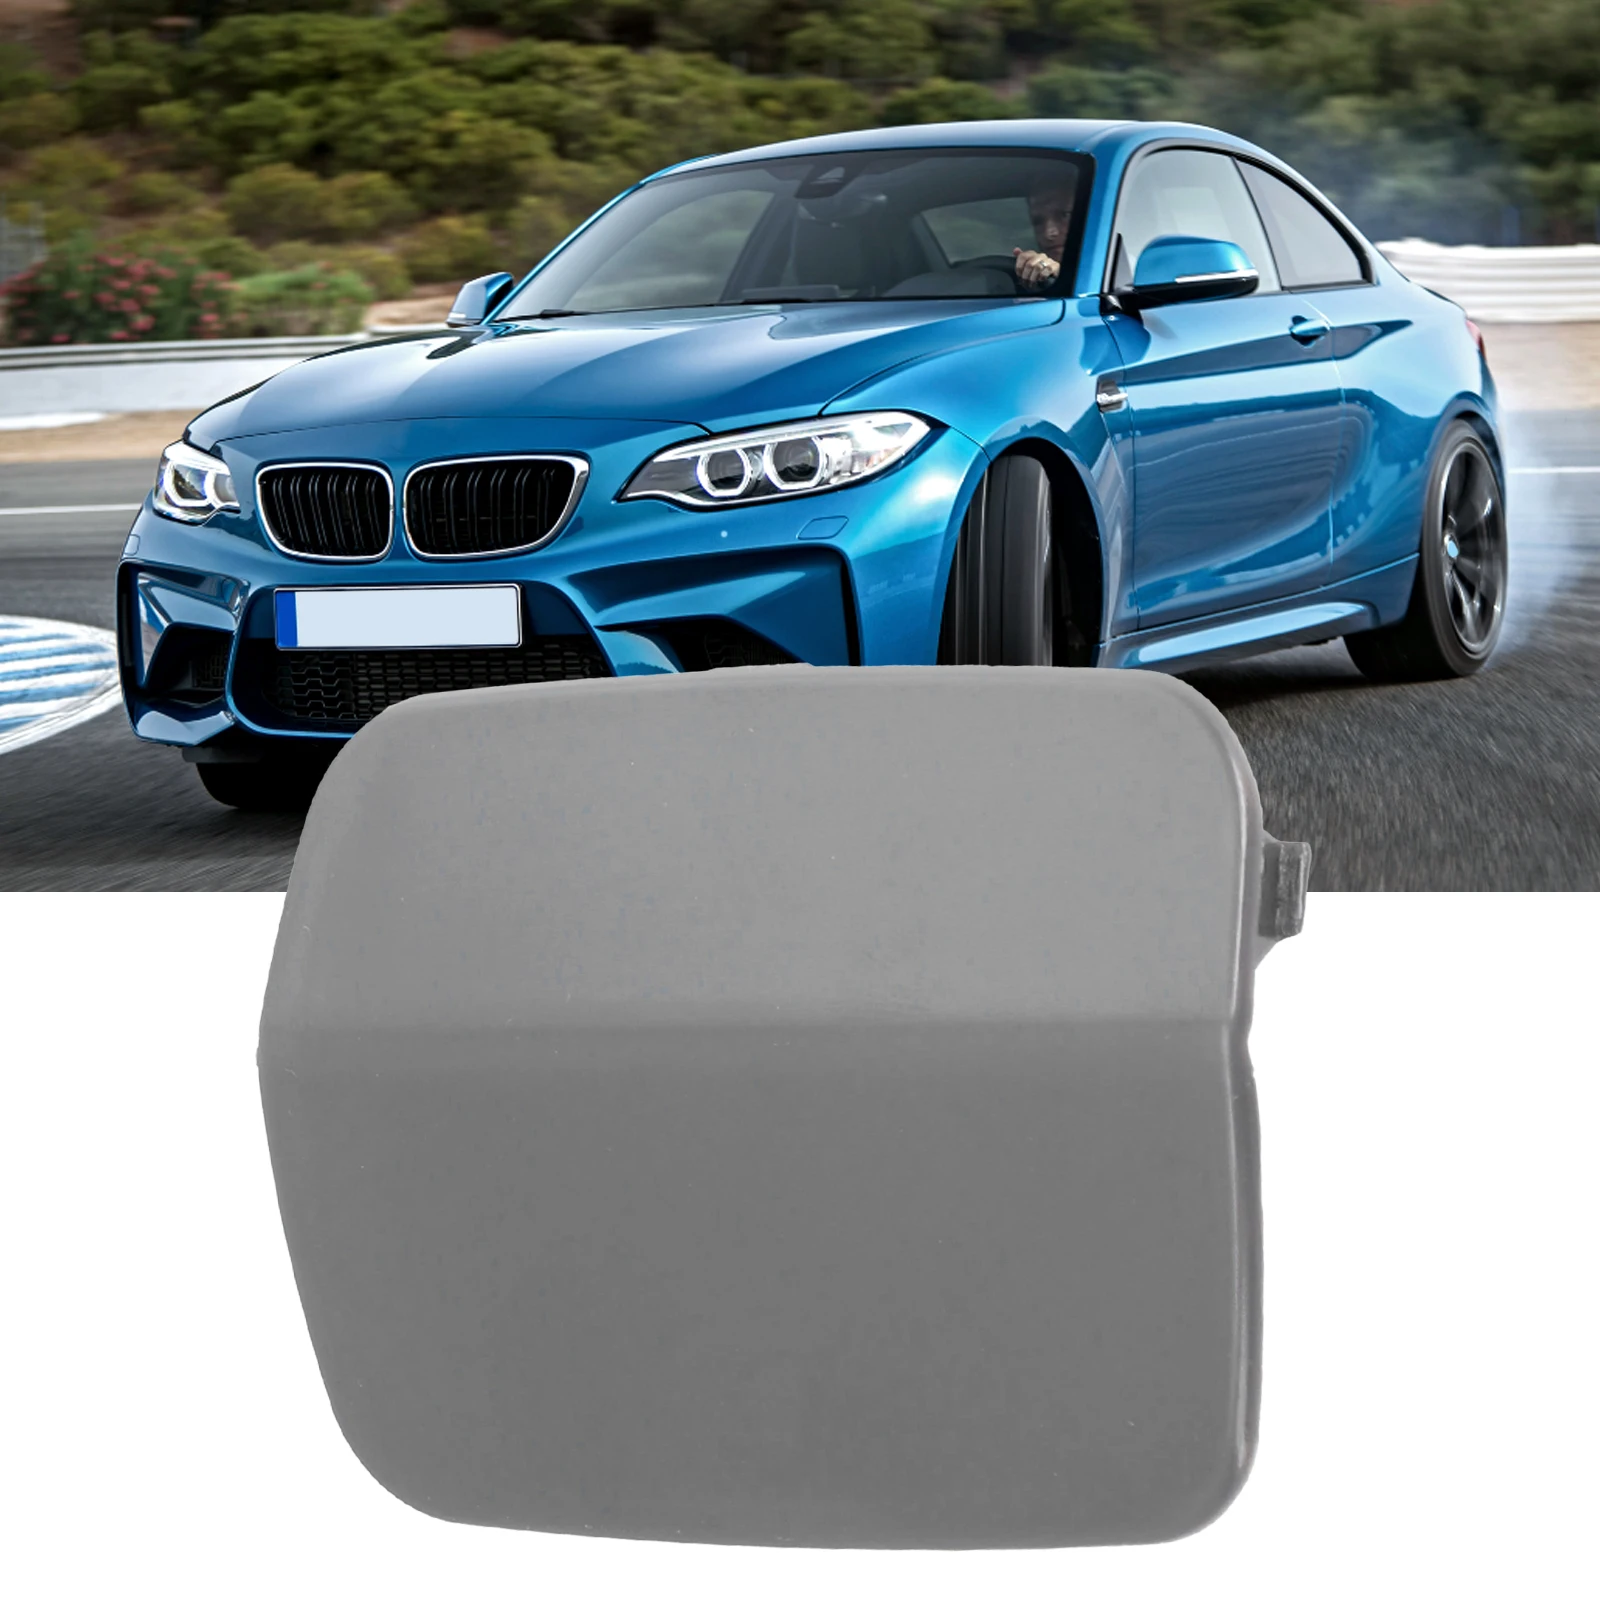 Hook Tow Hook Cover For BMW Not Universal Fitment 51127161497 ABS Materials Accessories Brand New Bumper Inserts